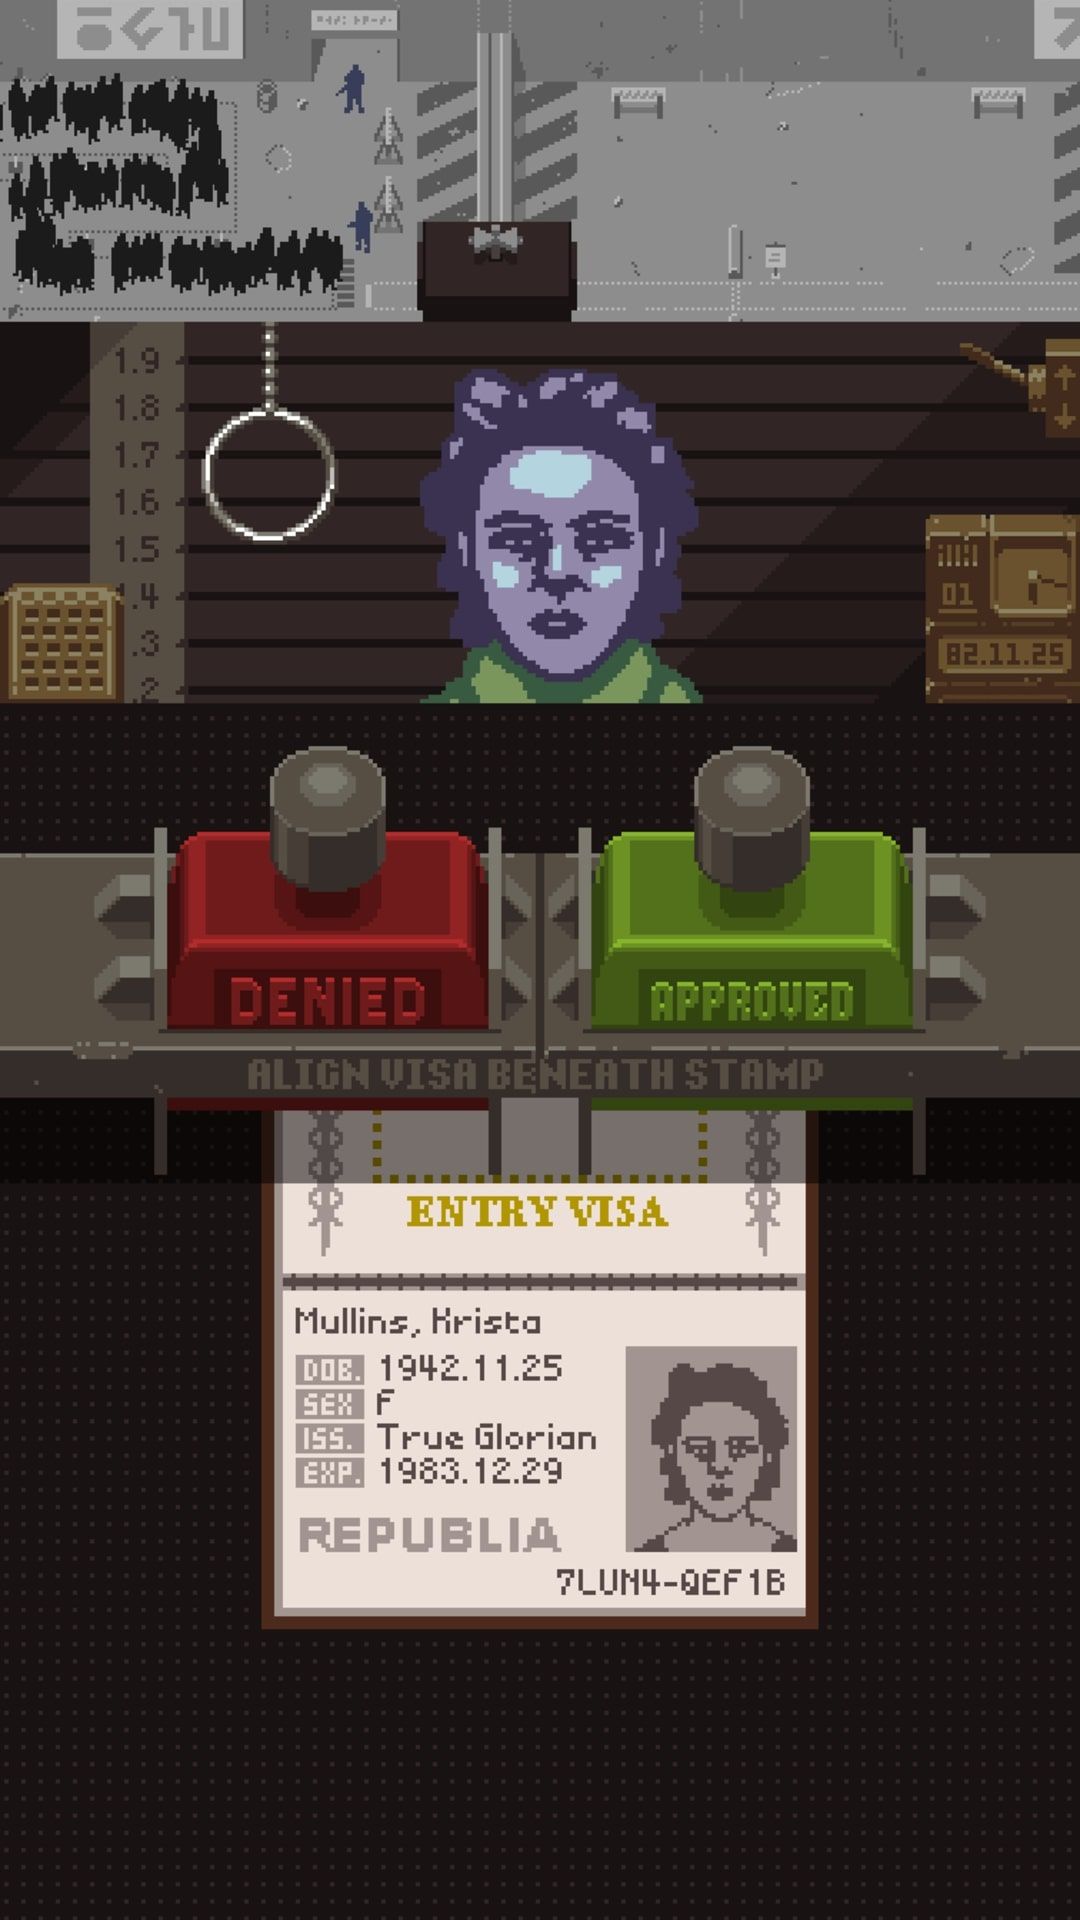 best-pixel-art-games-on-android-papers-please-entry-visa